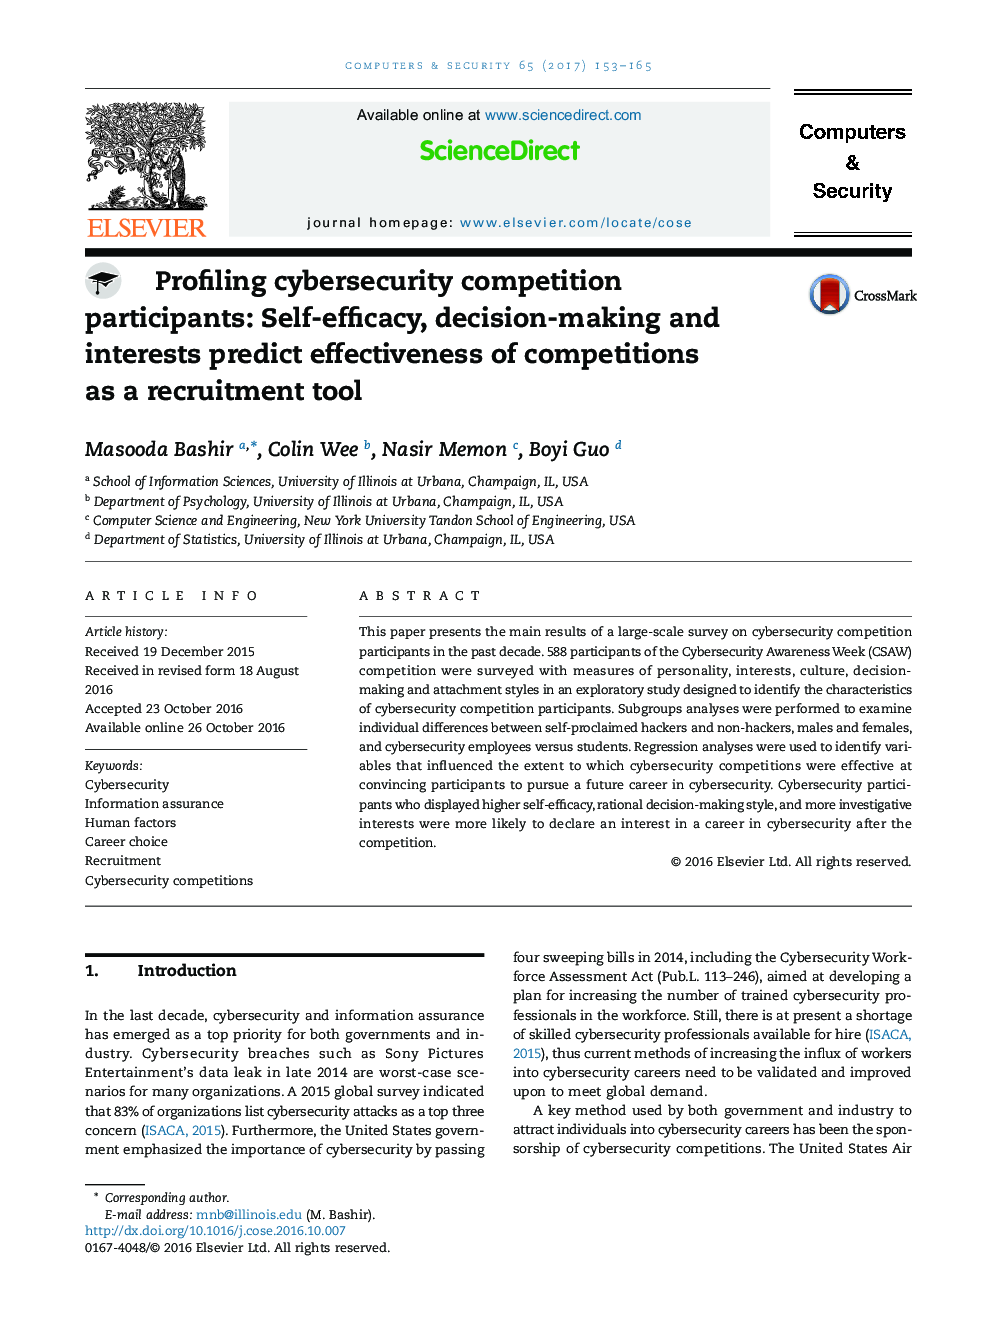 Profiling cybersecurity competition participants: Self-efficacy, decision-making and interests predict effectiveness of competitions as a recruitment tool